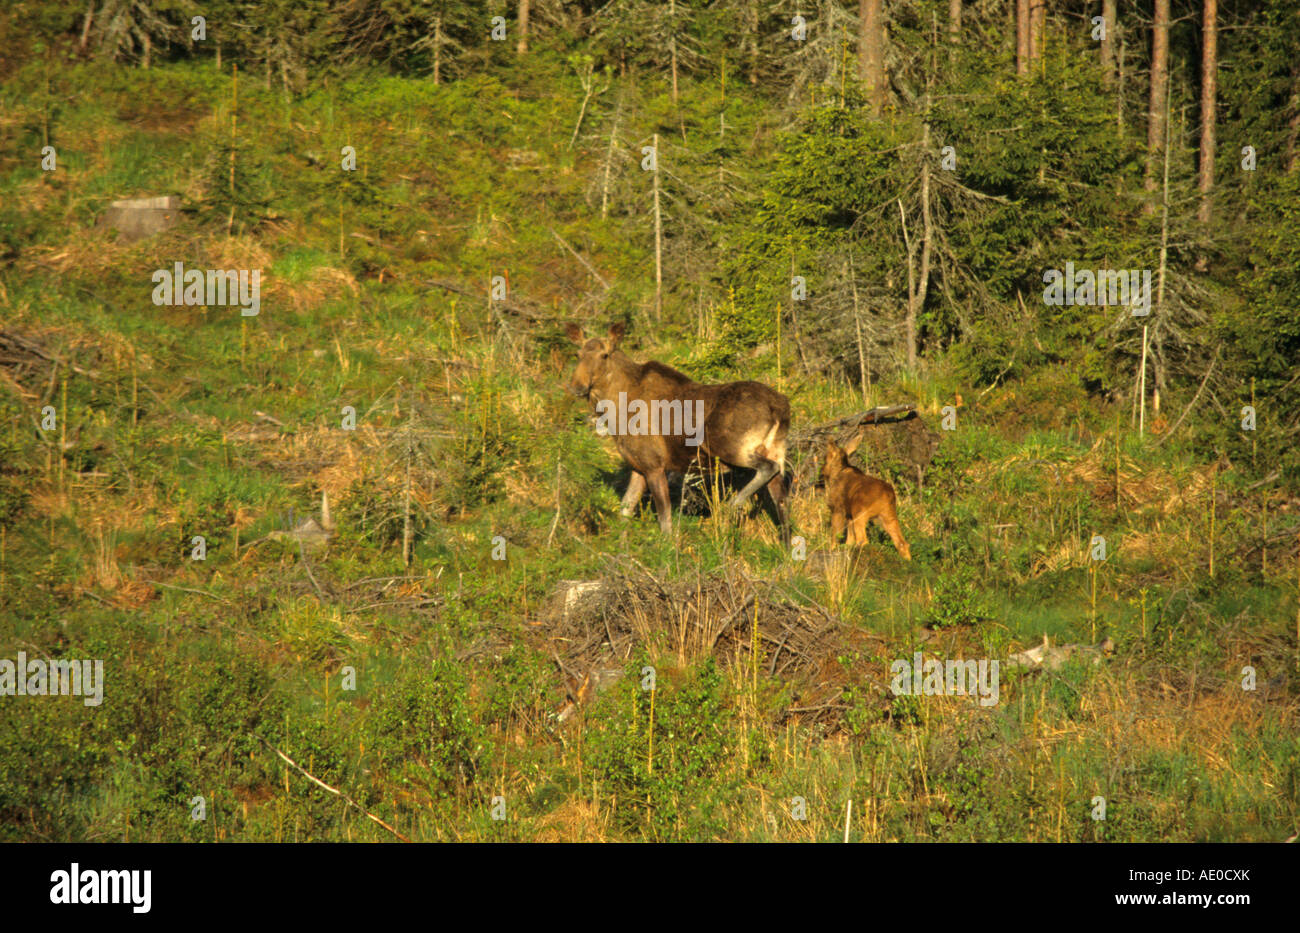 Moose Alce alces mother with a small calf walking through a forest in Finland Europe Stock Photo